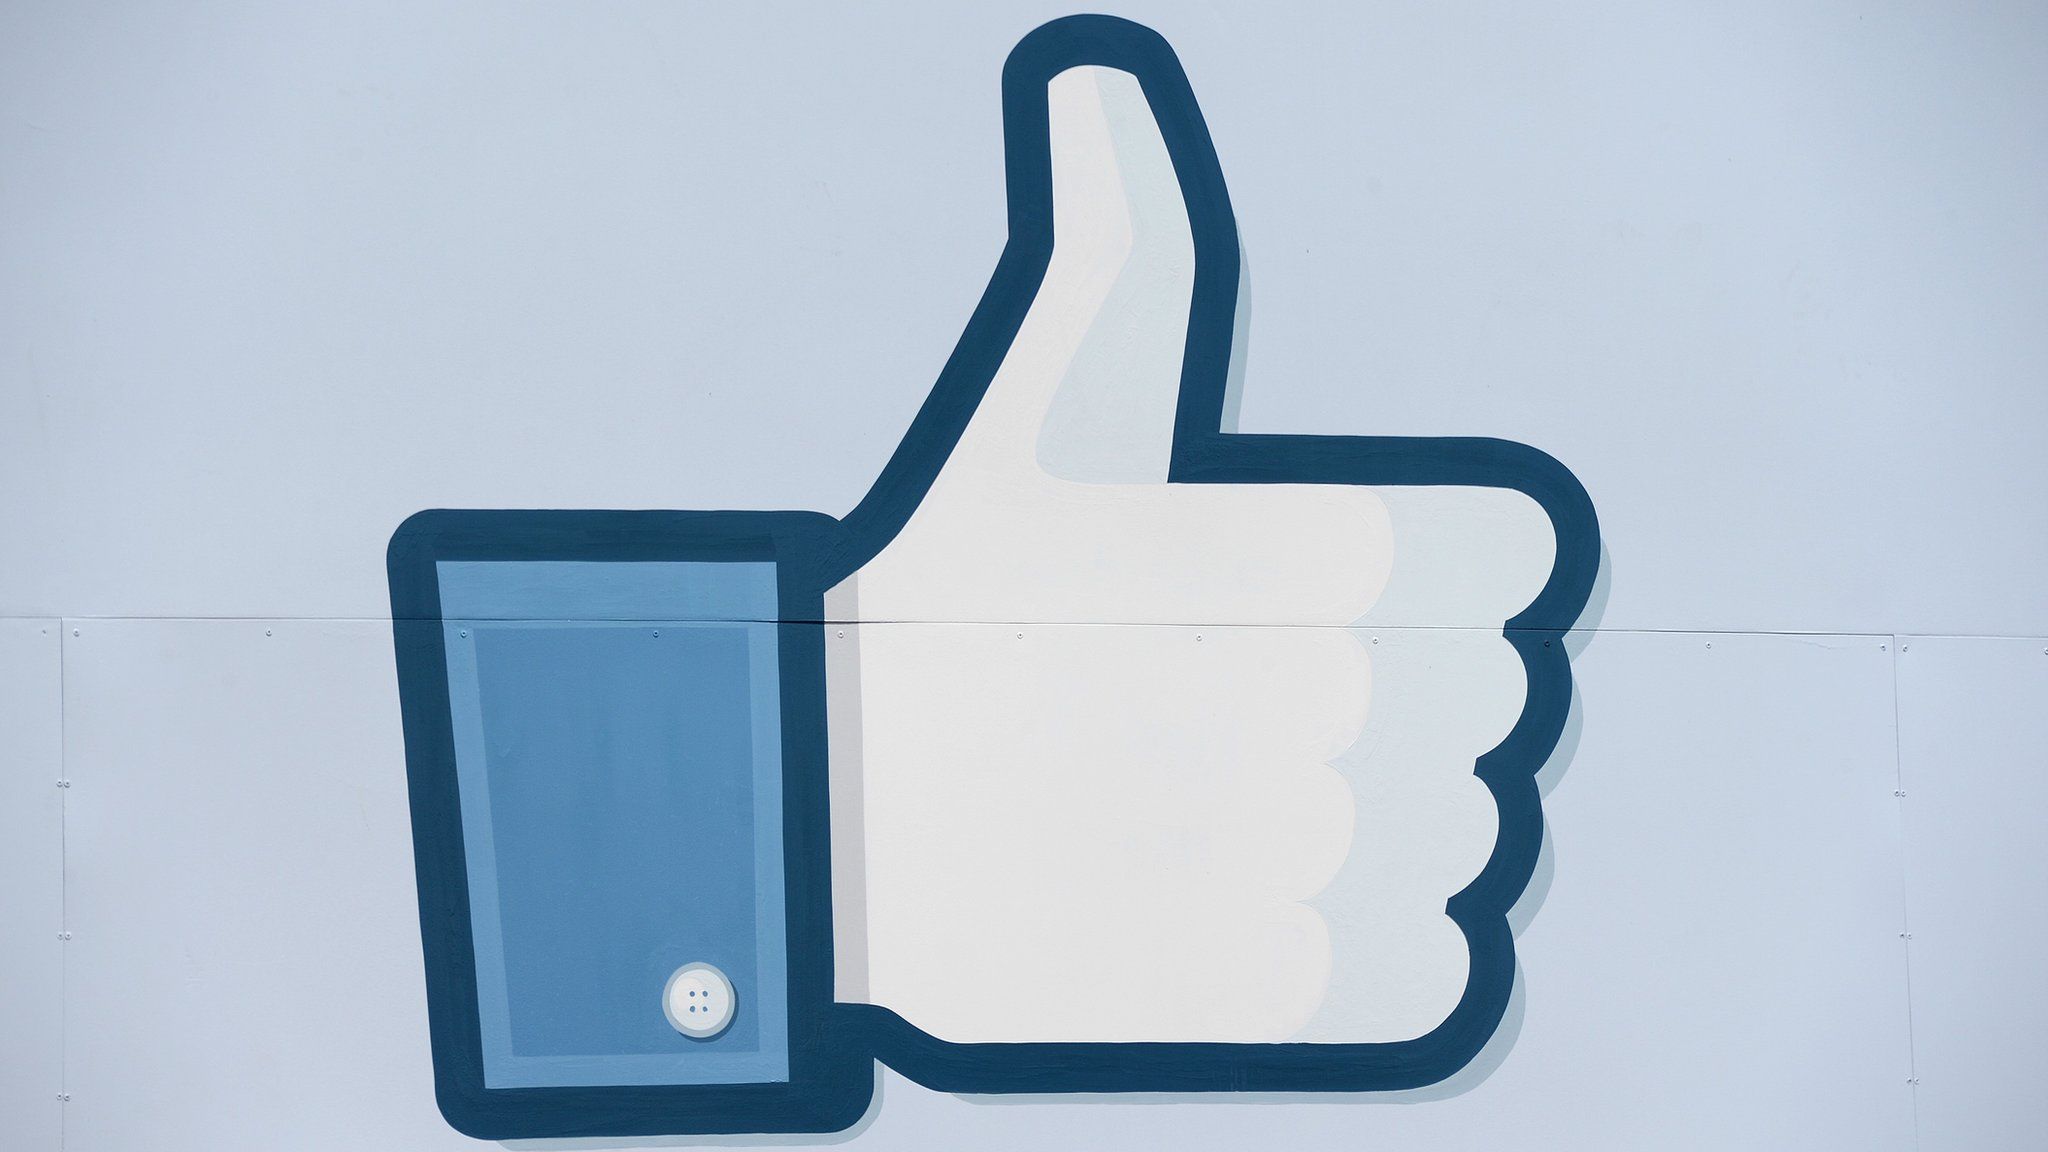 A thumbs up or 'Like' icon at the Facebook main campus in Menlo Park, California